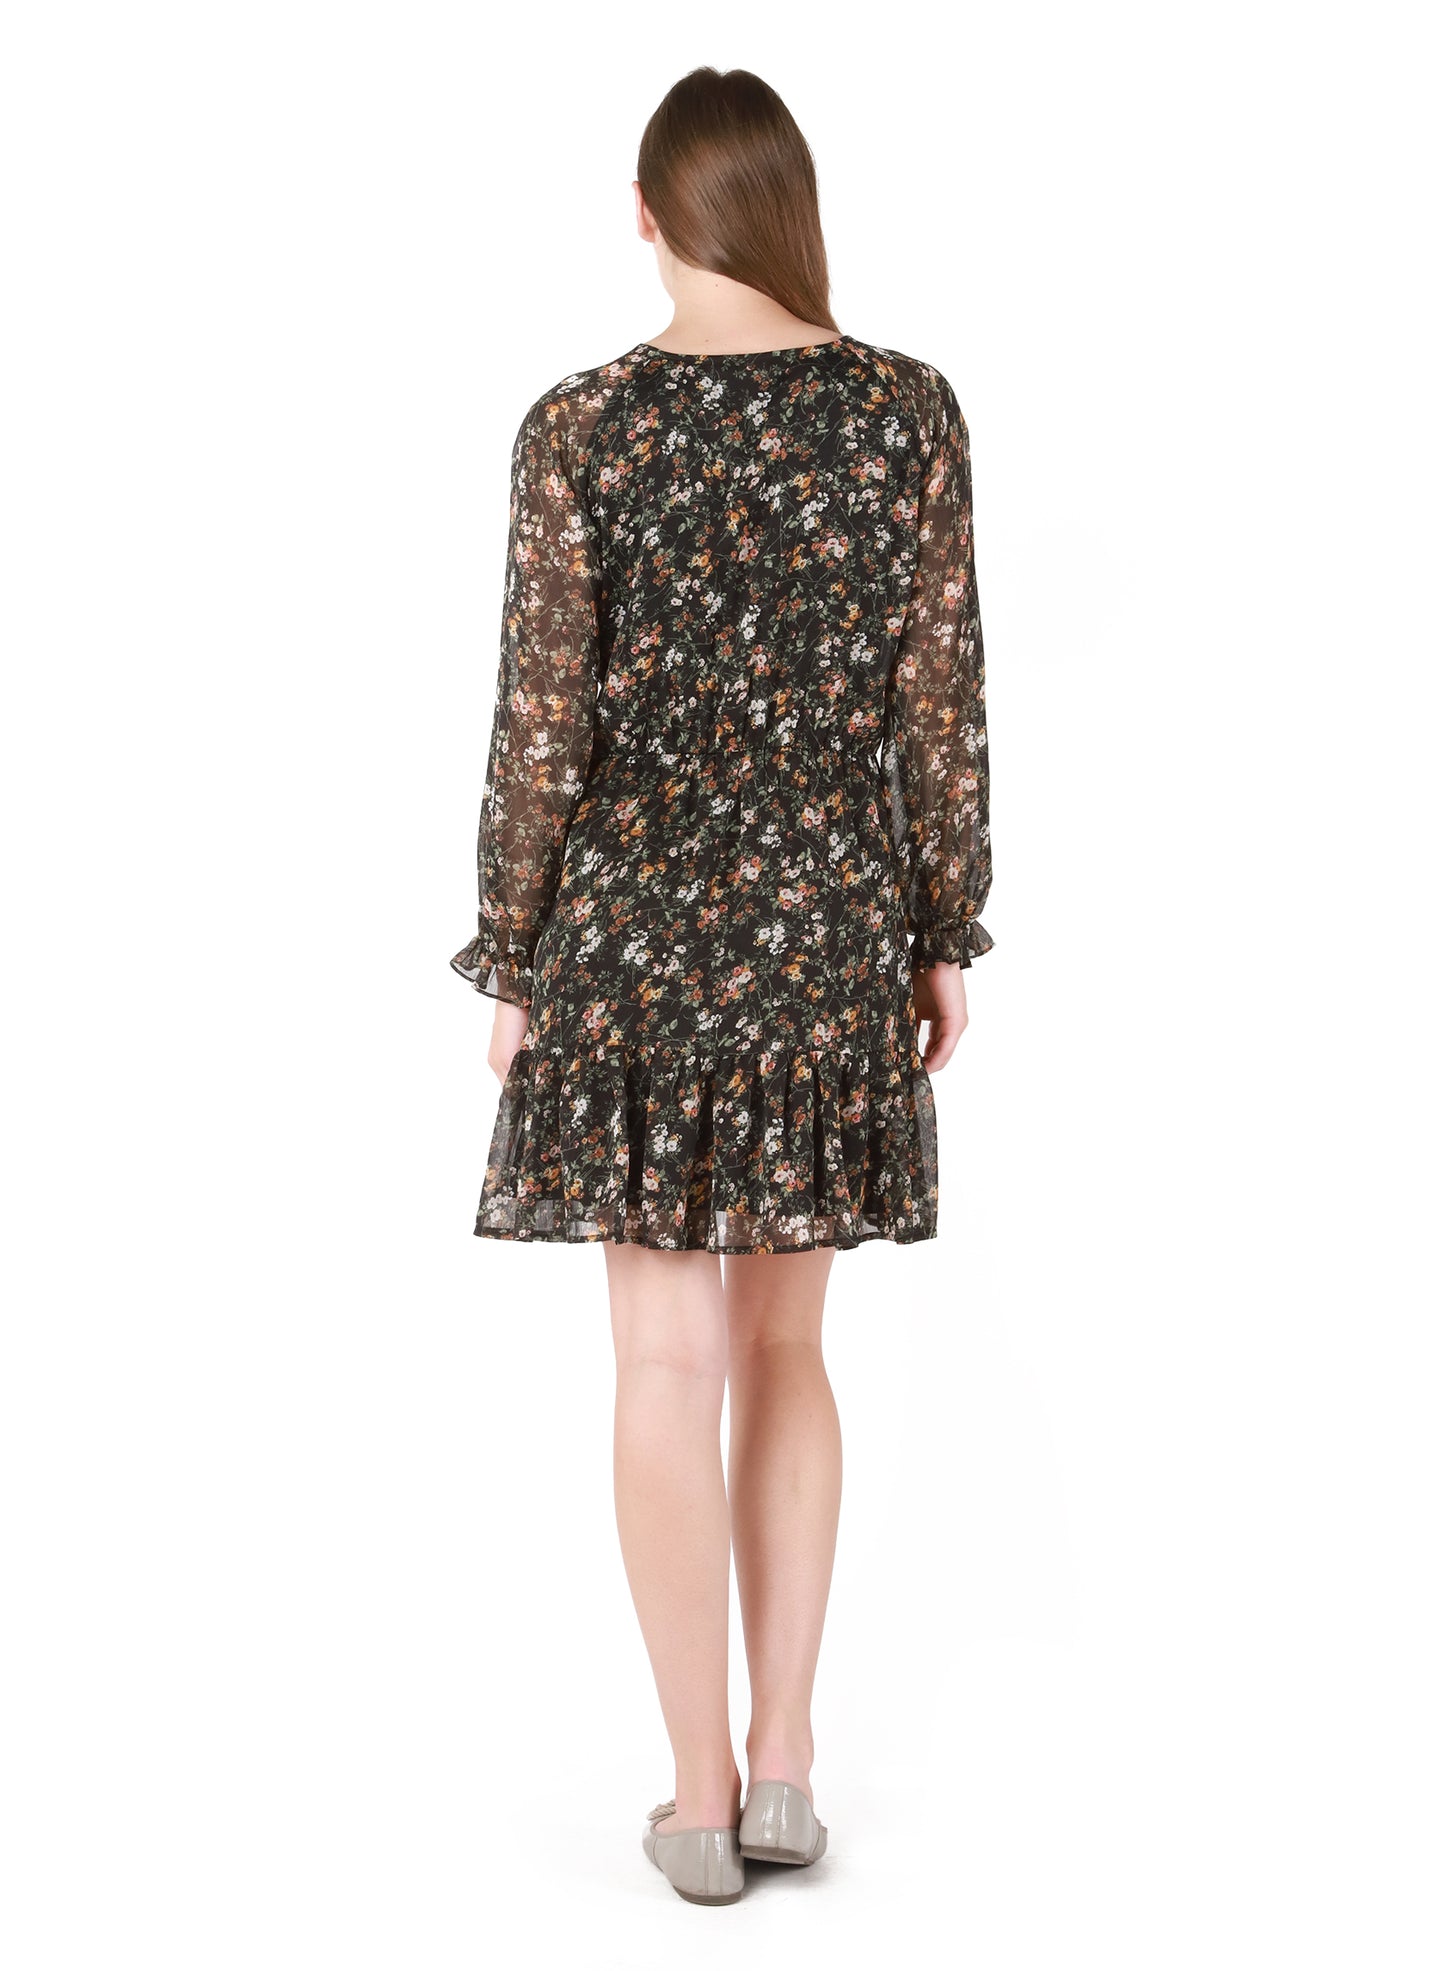 Garden Floral Tiered Wrap Dress (Size M to 3X)